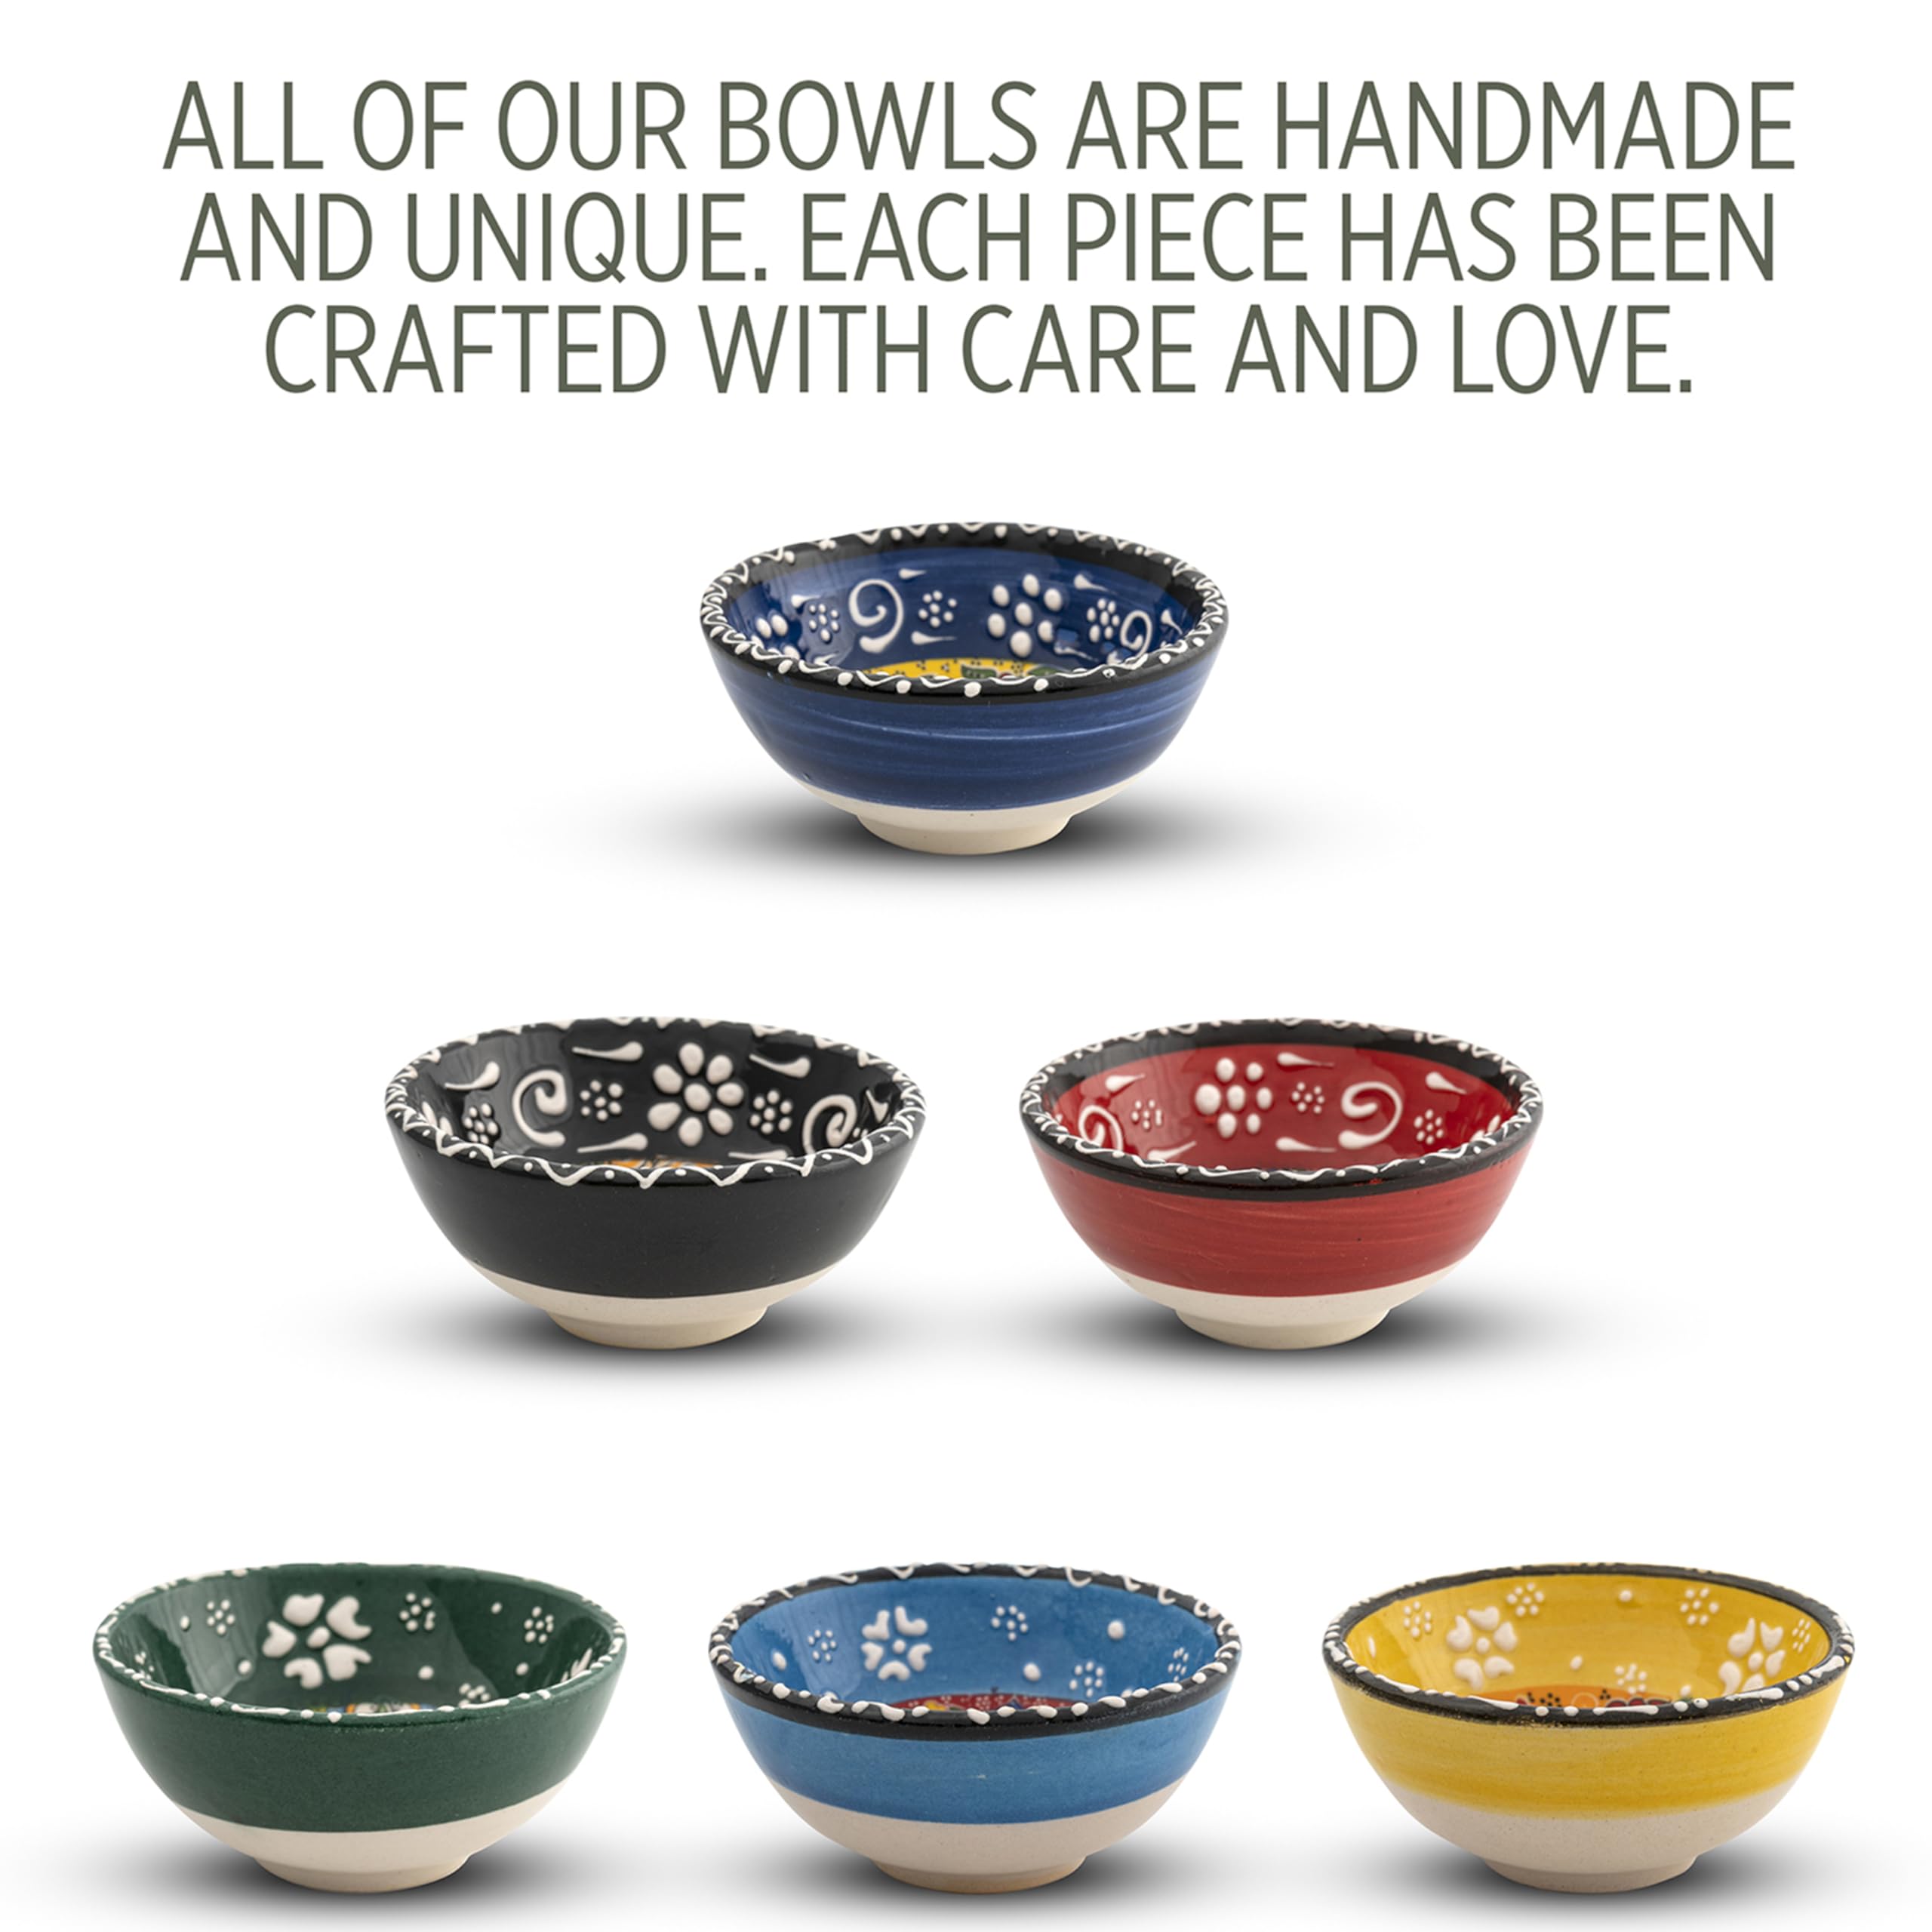 Bascuda® Small Ceramic Bowls Set of 6 with Gift Box - Snack Bowls for Tapas, Dessert, Nuts, Olive, Soy Sauce Dish, Dip - Colourful Decorative Moroccan Spanish Mexican - Decorative Bowl - 3.14 Inches